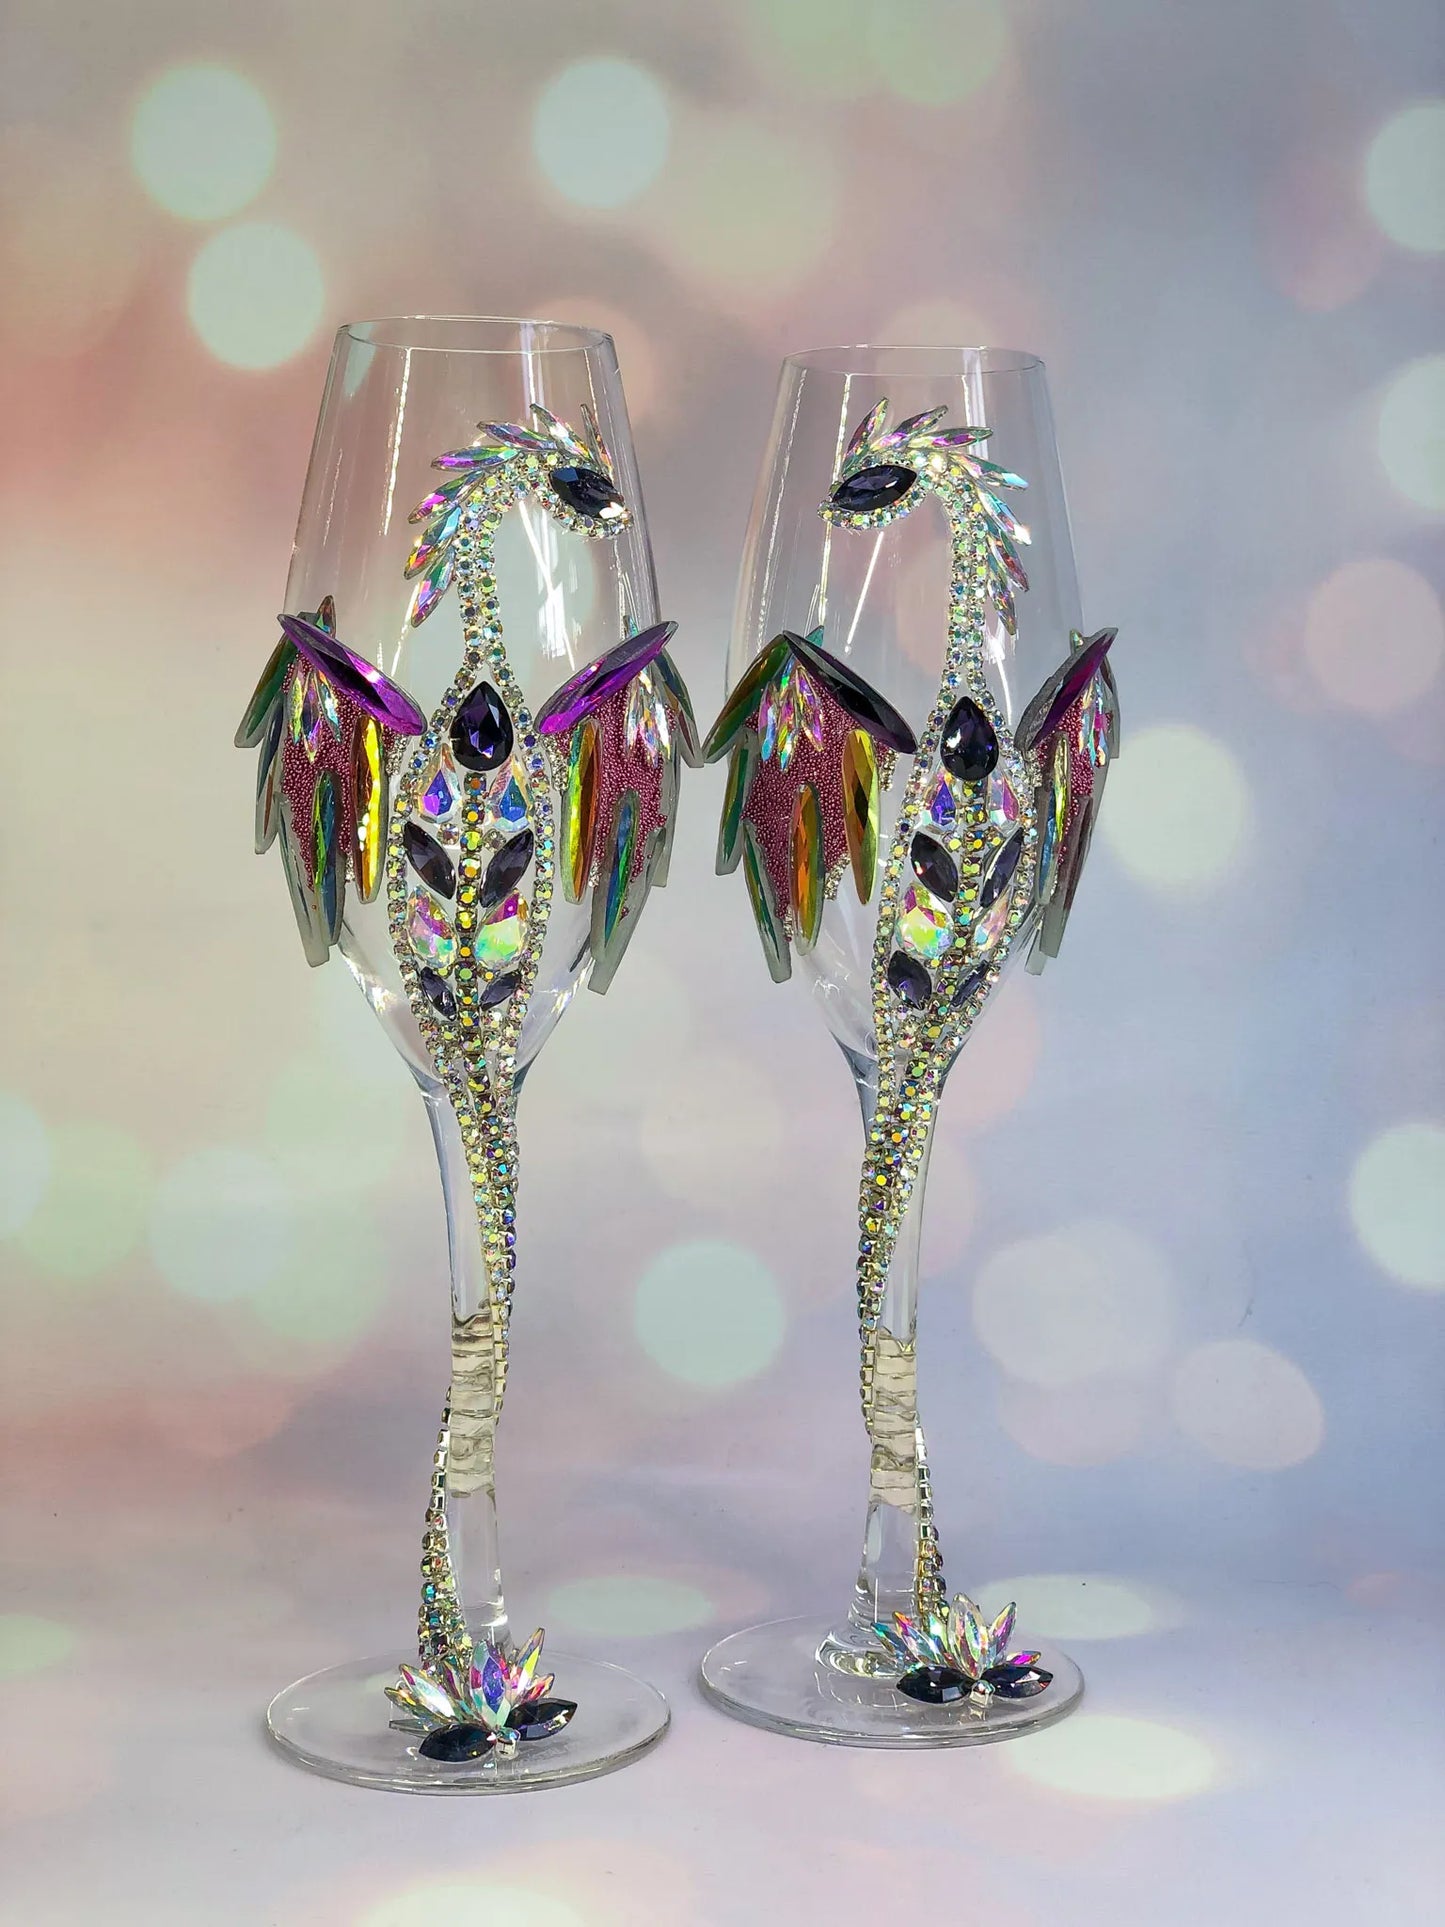 Two ornate dragon-themed wineglasses standing tall, accentuated with gleaming jewel-like details; set against a soothing gradient of teal and muted lavender.